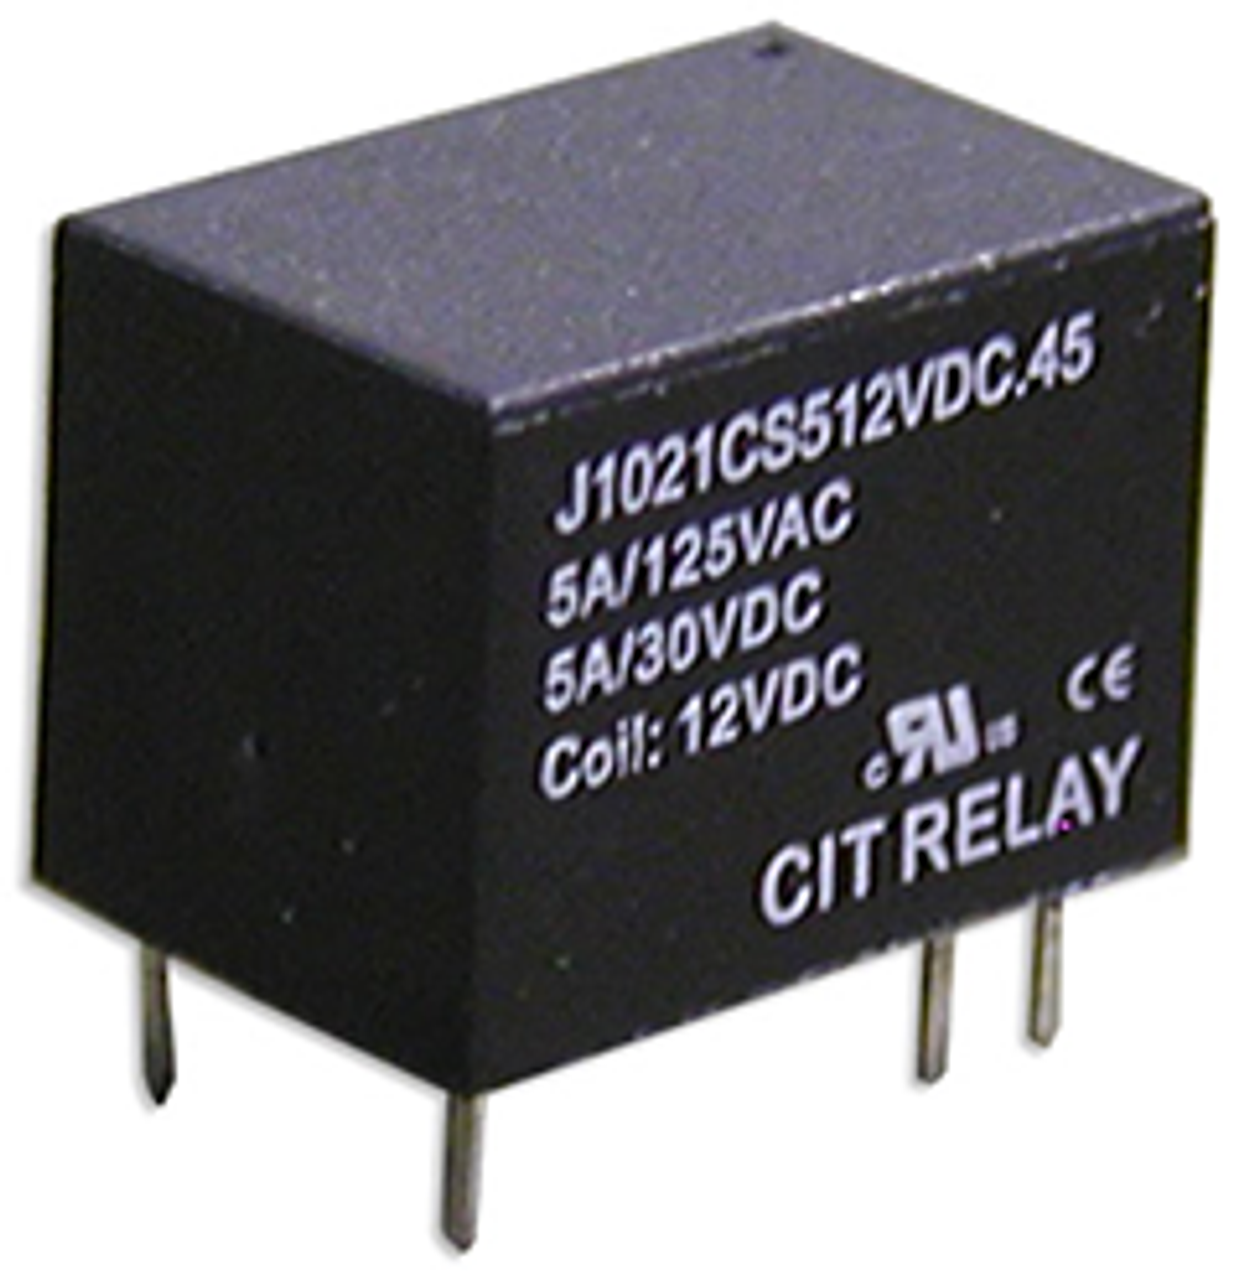 CIT Relay and Switch J1021AS3P12VDC.45 Power Relays